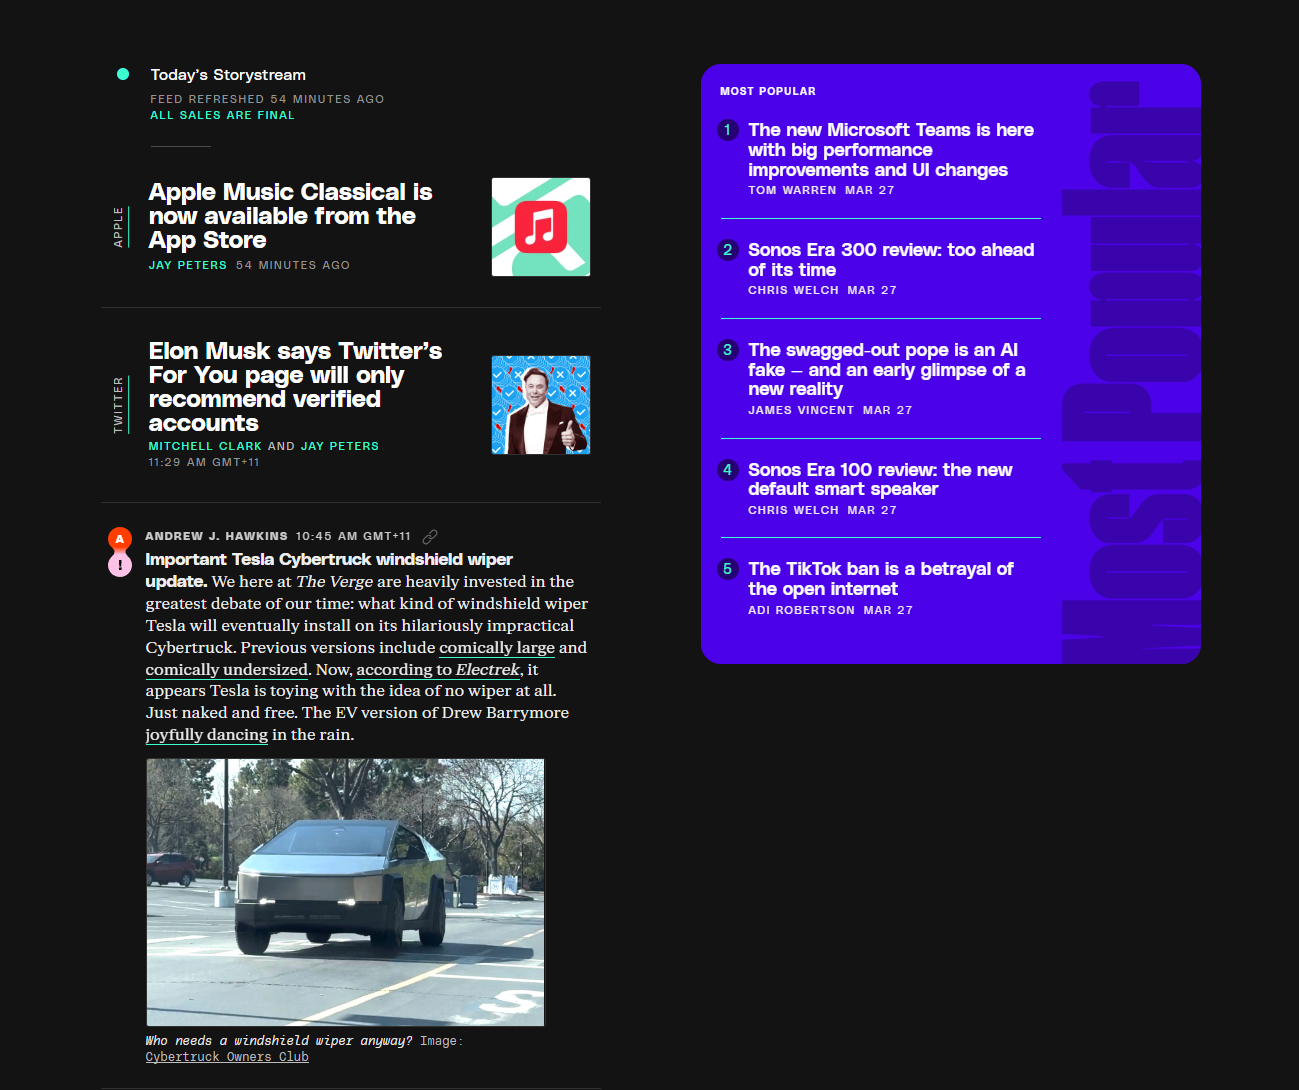 The Verge’s Facelift